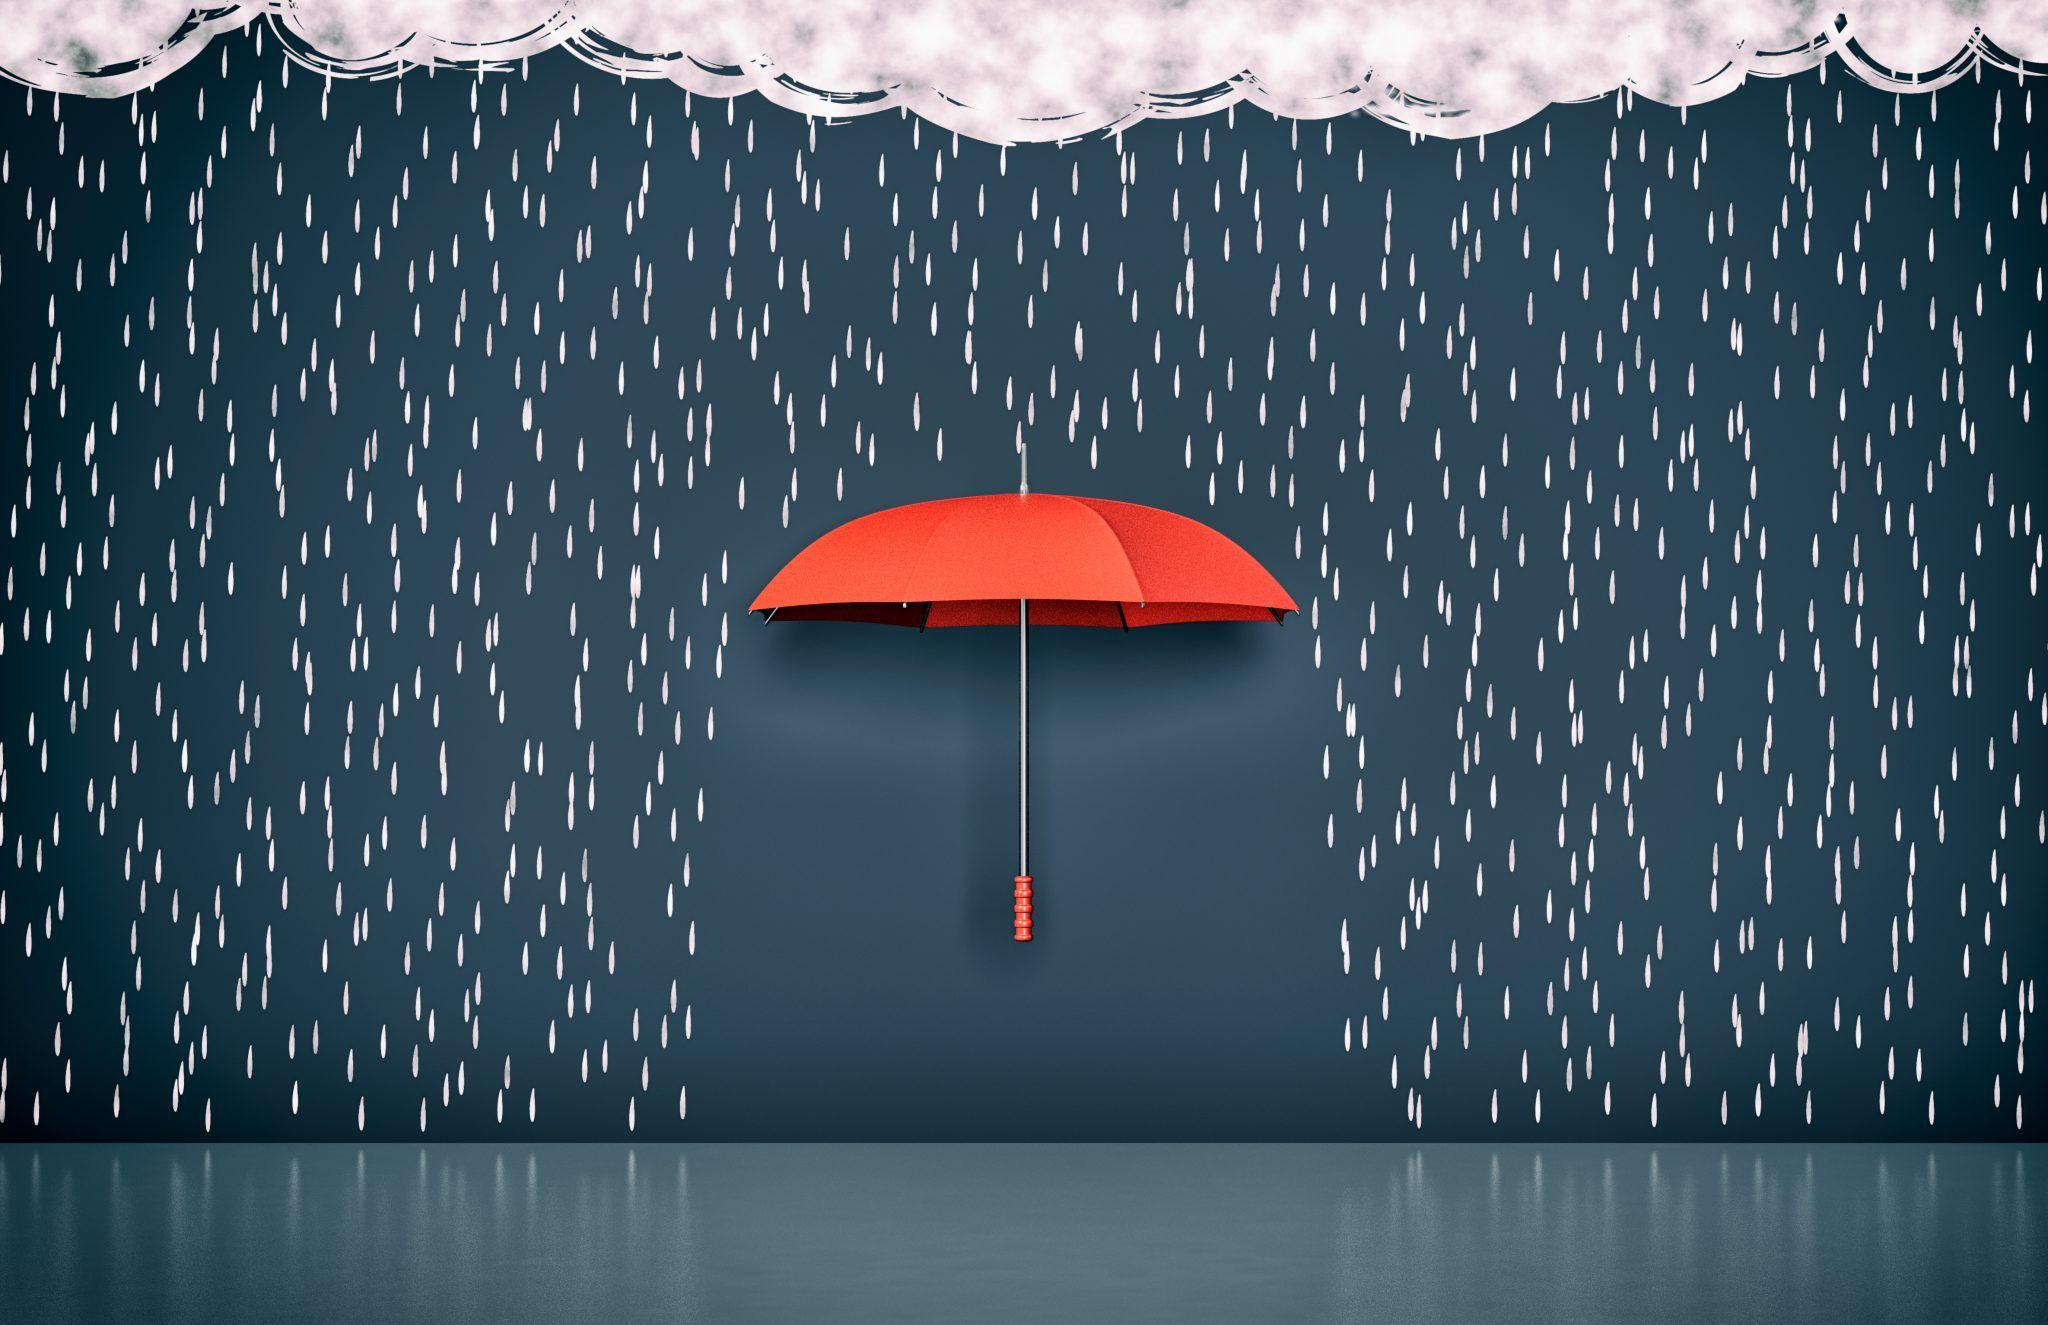 Why Term insurance makes sense for most people